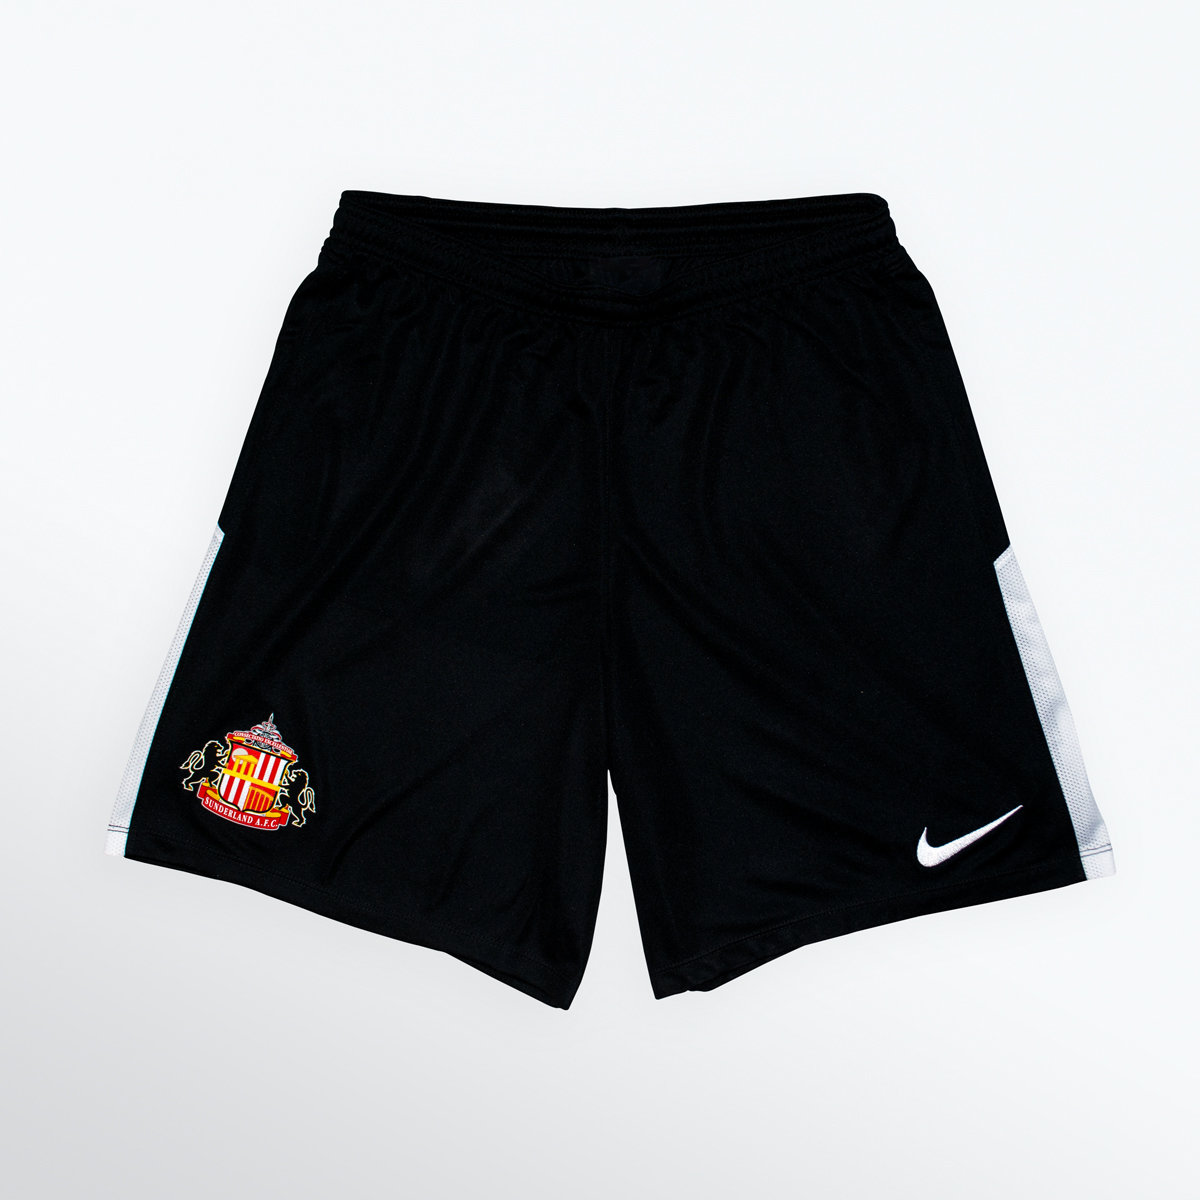 22-23 Adult Home Shorts